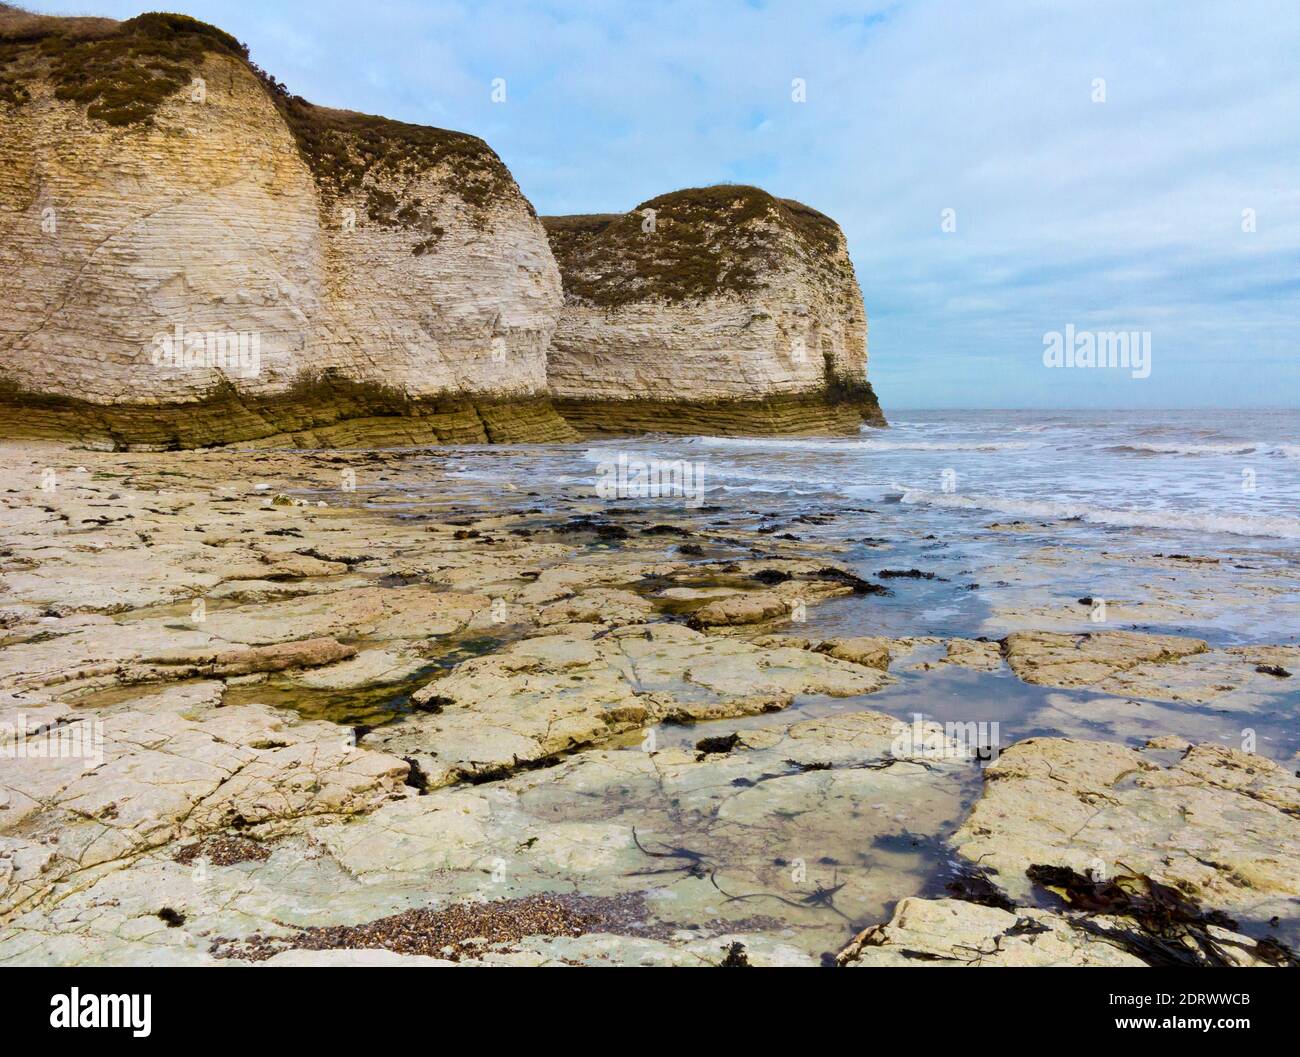 Chalk cliffs and beach at Flamborough Head on the North Yorkshire coast England UK with the North Sea visible. Stock Photo